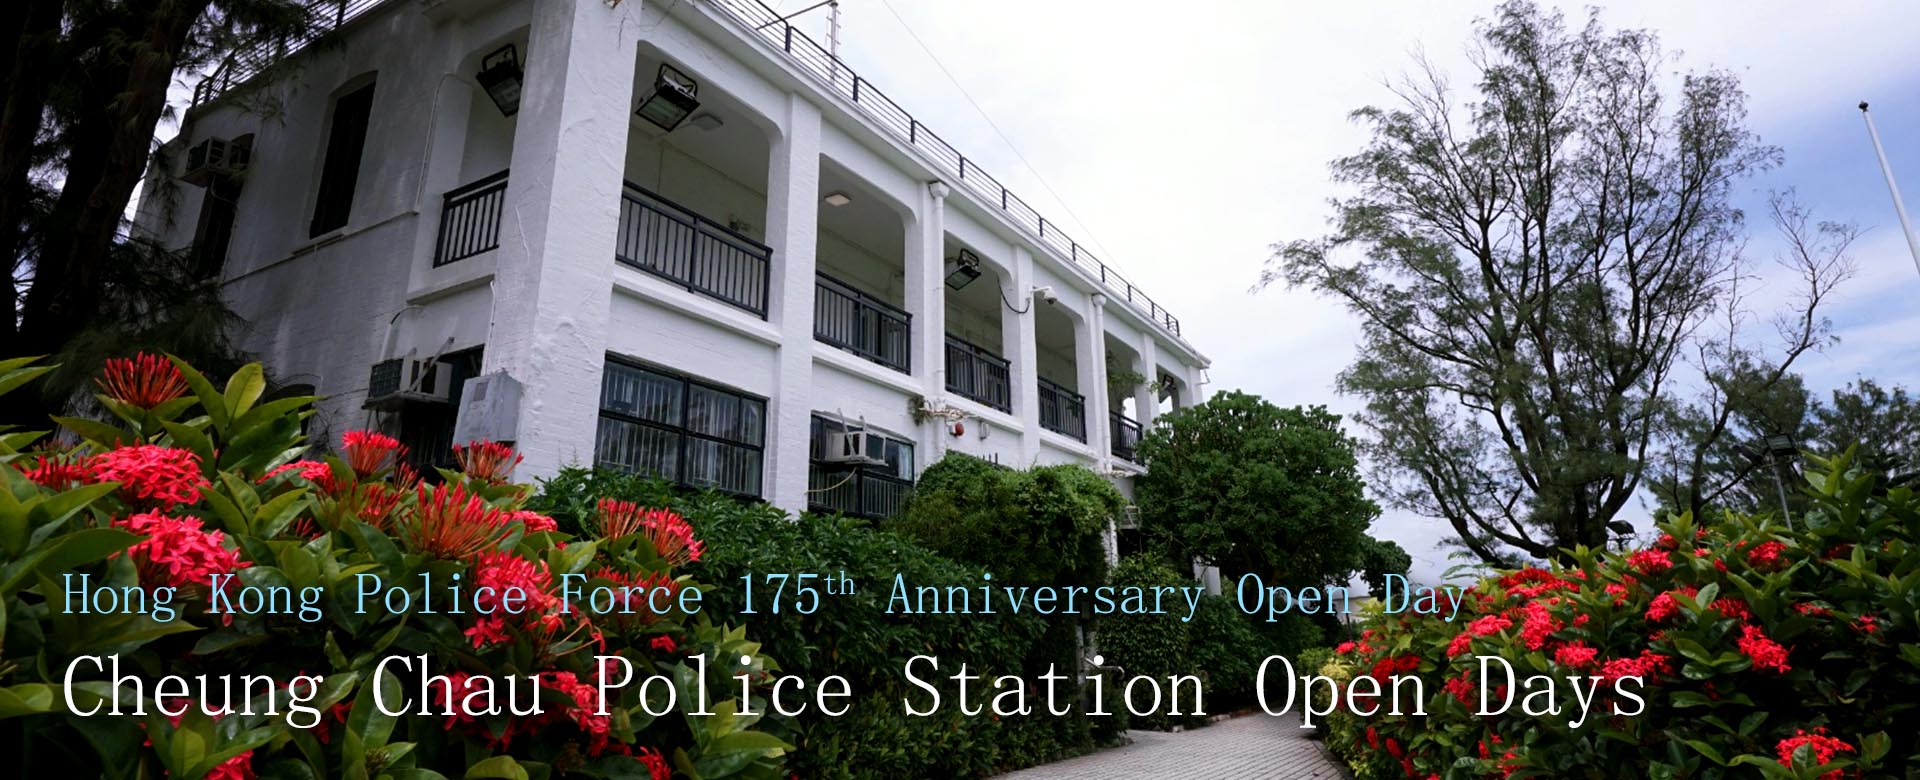 Hong Kong Police Force 175th Anniversary Open Day Cheung Chau Police Station Open Days